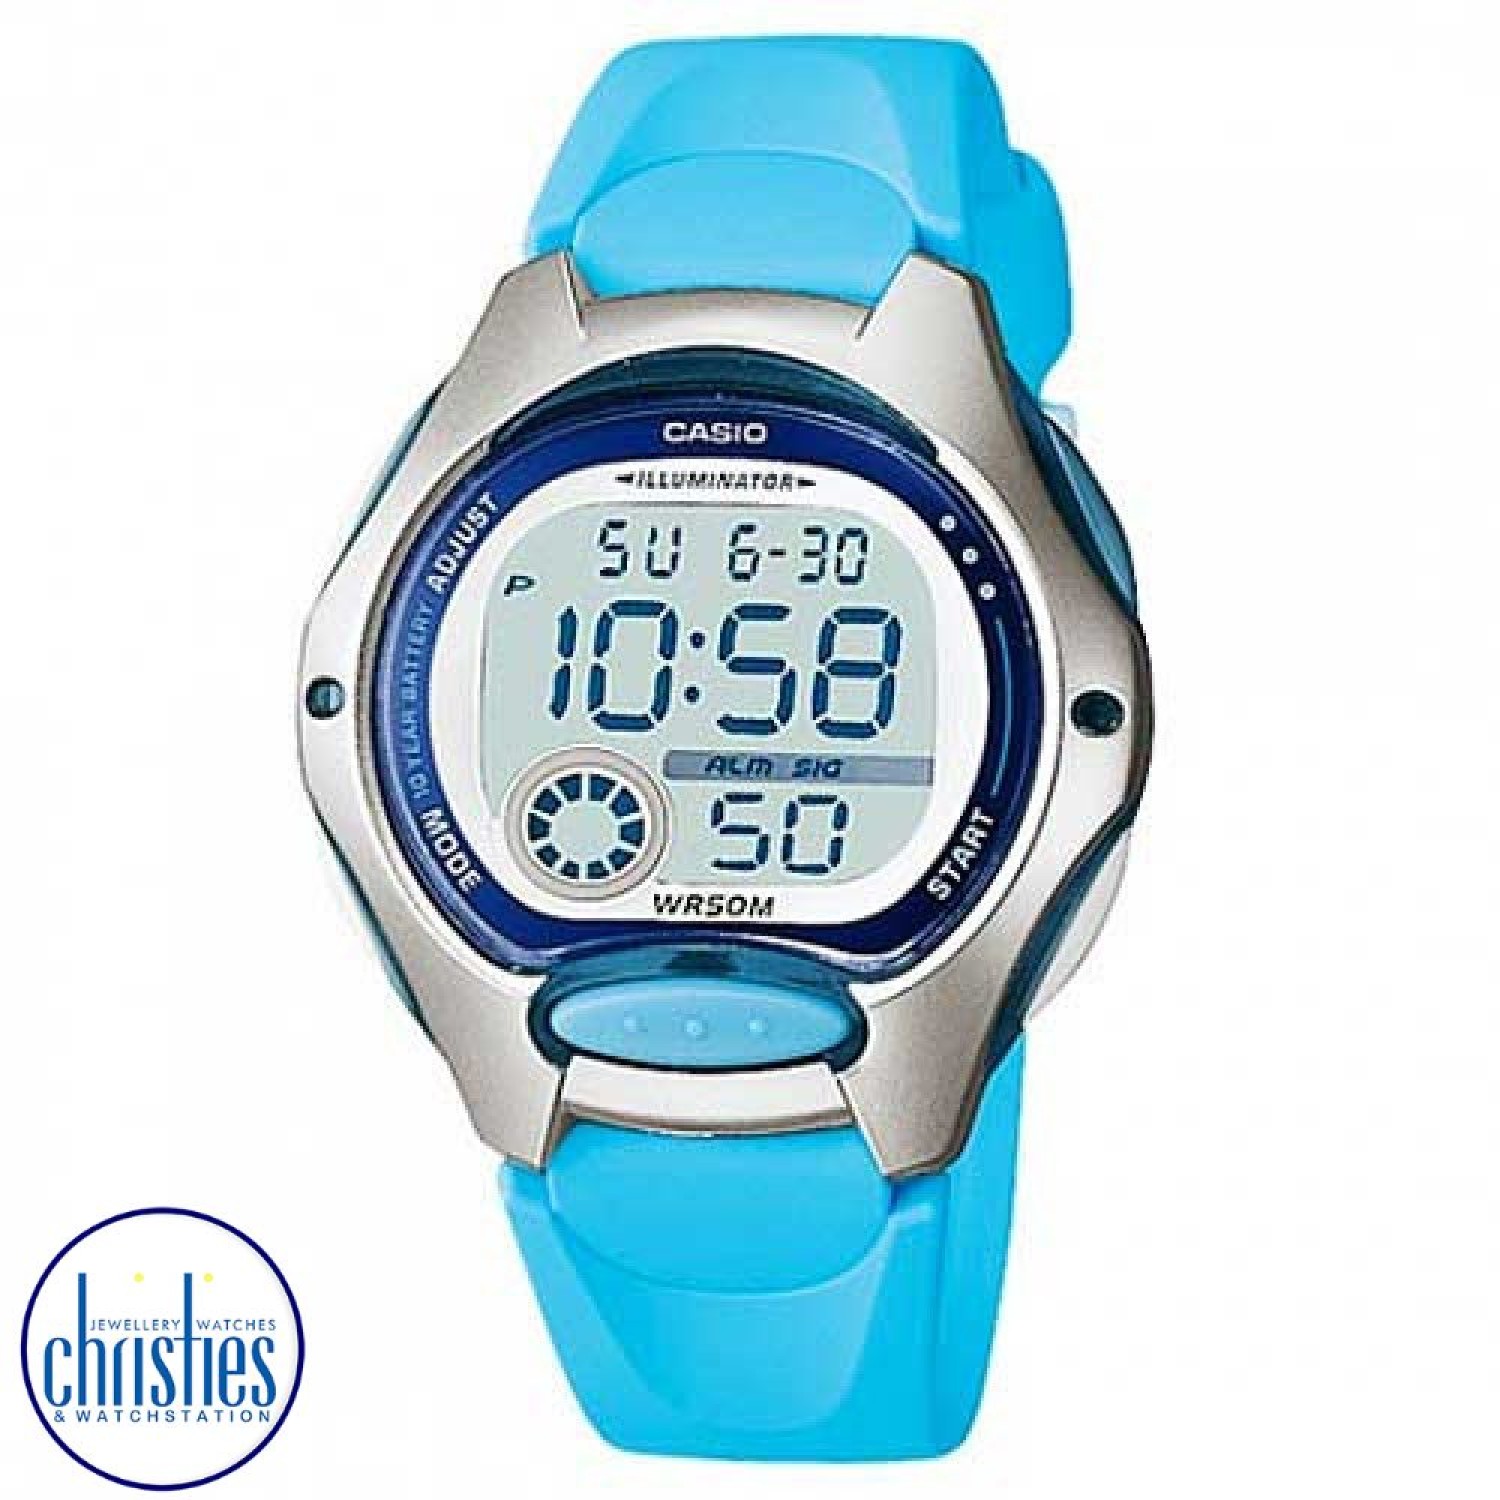 LW200-2B Casio 50 Metres Childrens Watch. Casio’s Illuminator digital watch for women or children is a sleek and sporty timepiece featuring a Light Blue  plastic resin band, a metallic resin case and a large digital time display with stopwatch and day and